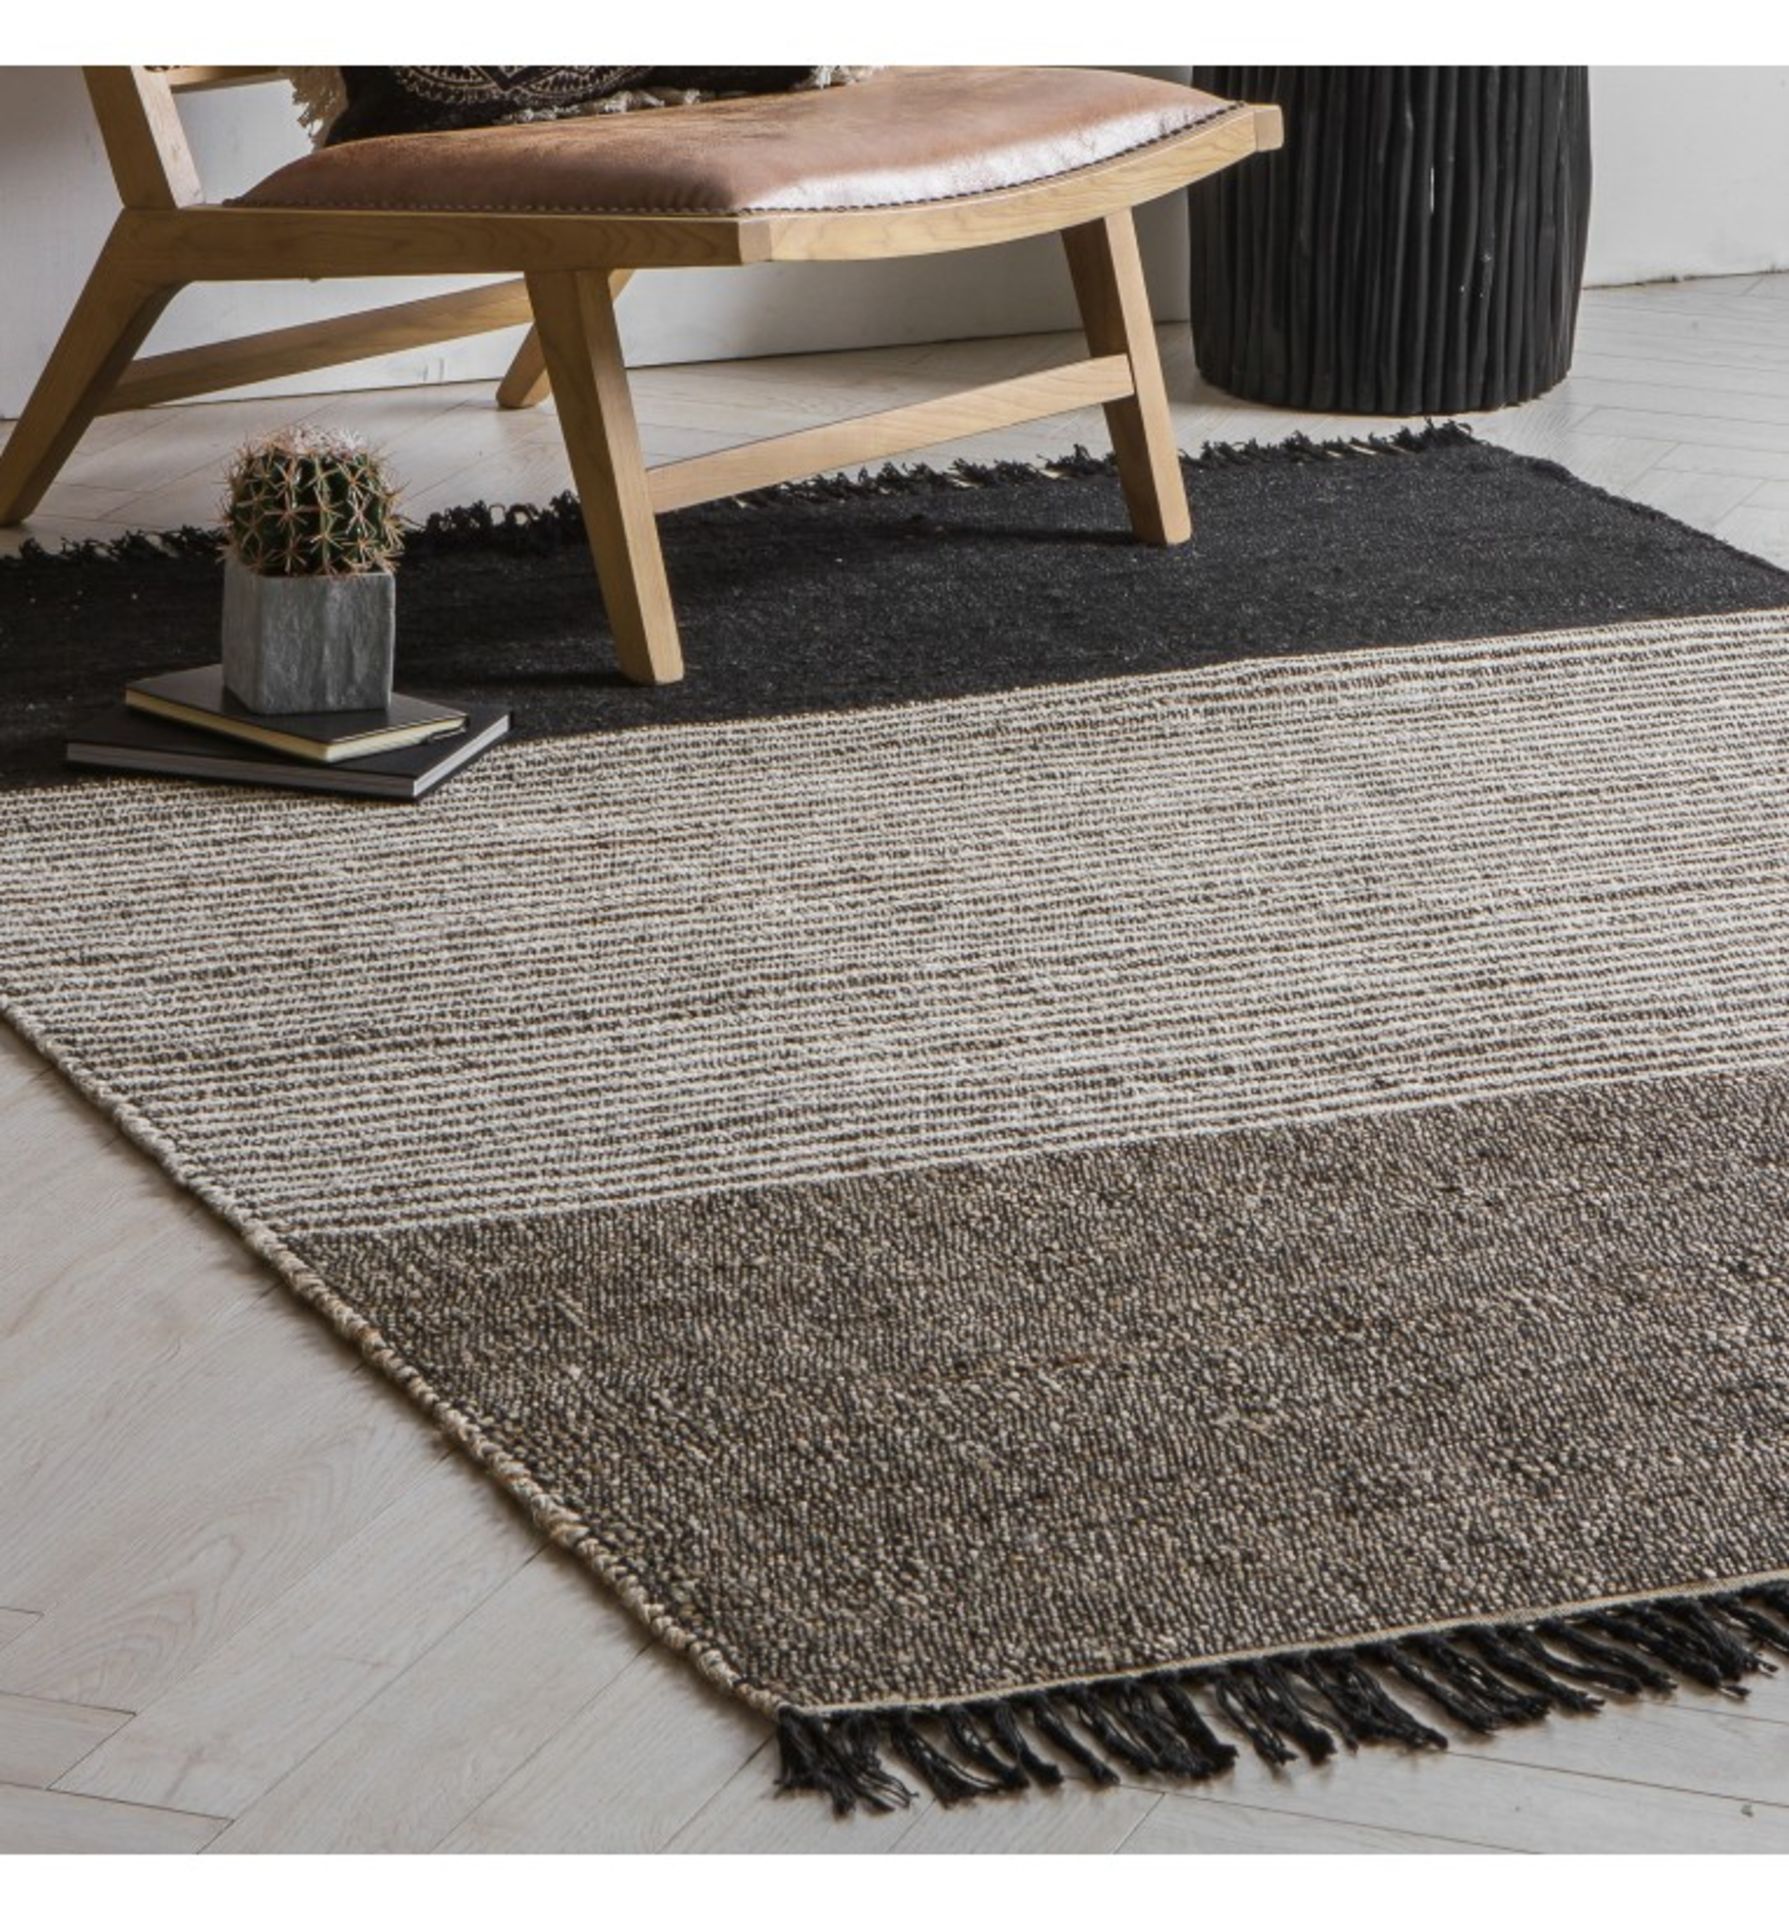 Crossland Rug Monochrome 1600 x 2300mm Modern And Monochromatic This Rug Is Perfect For Adding The